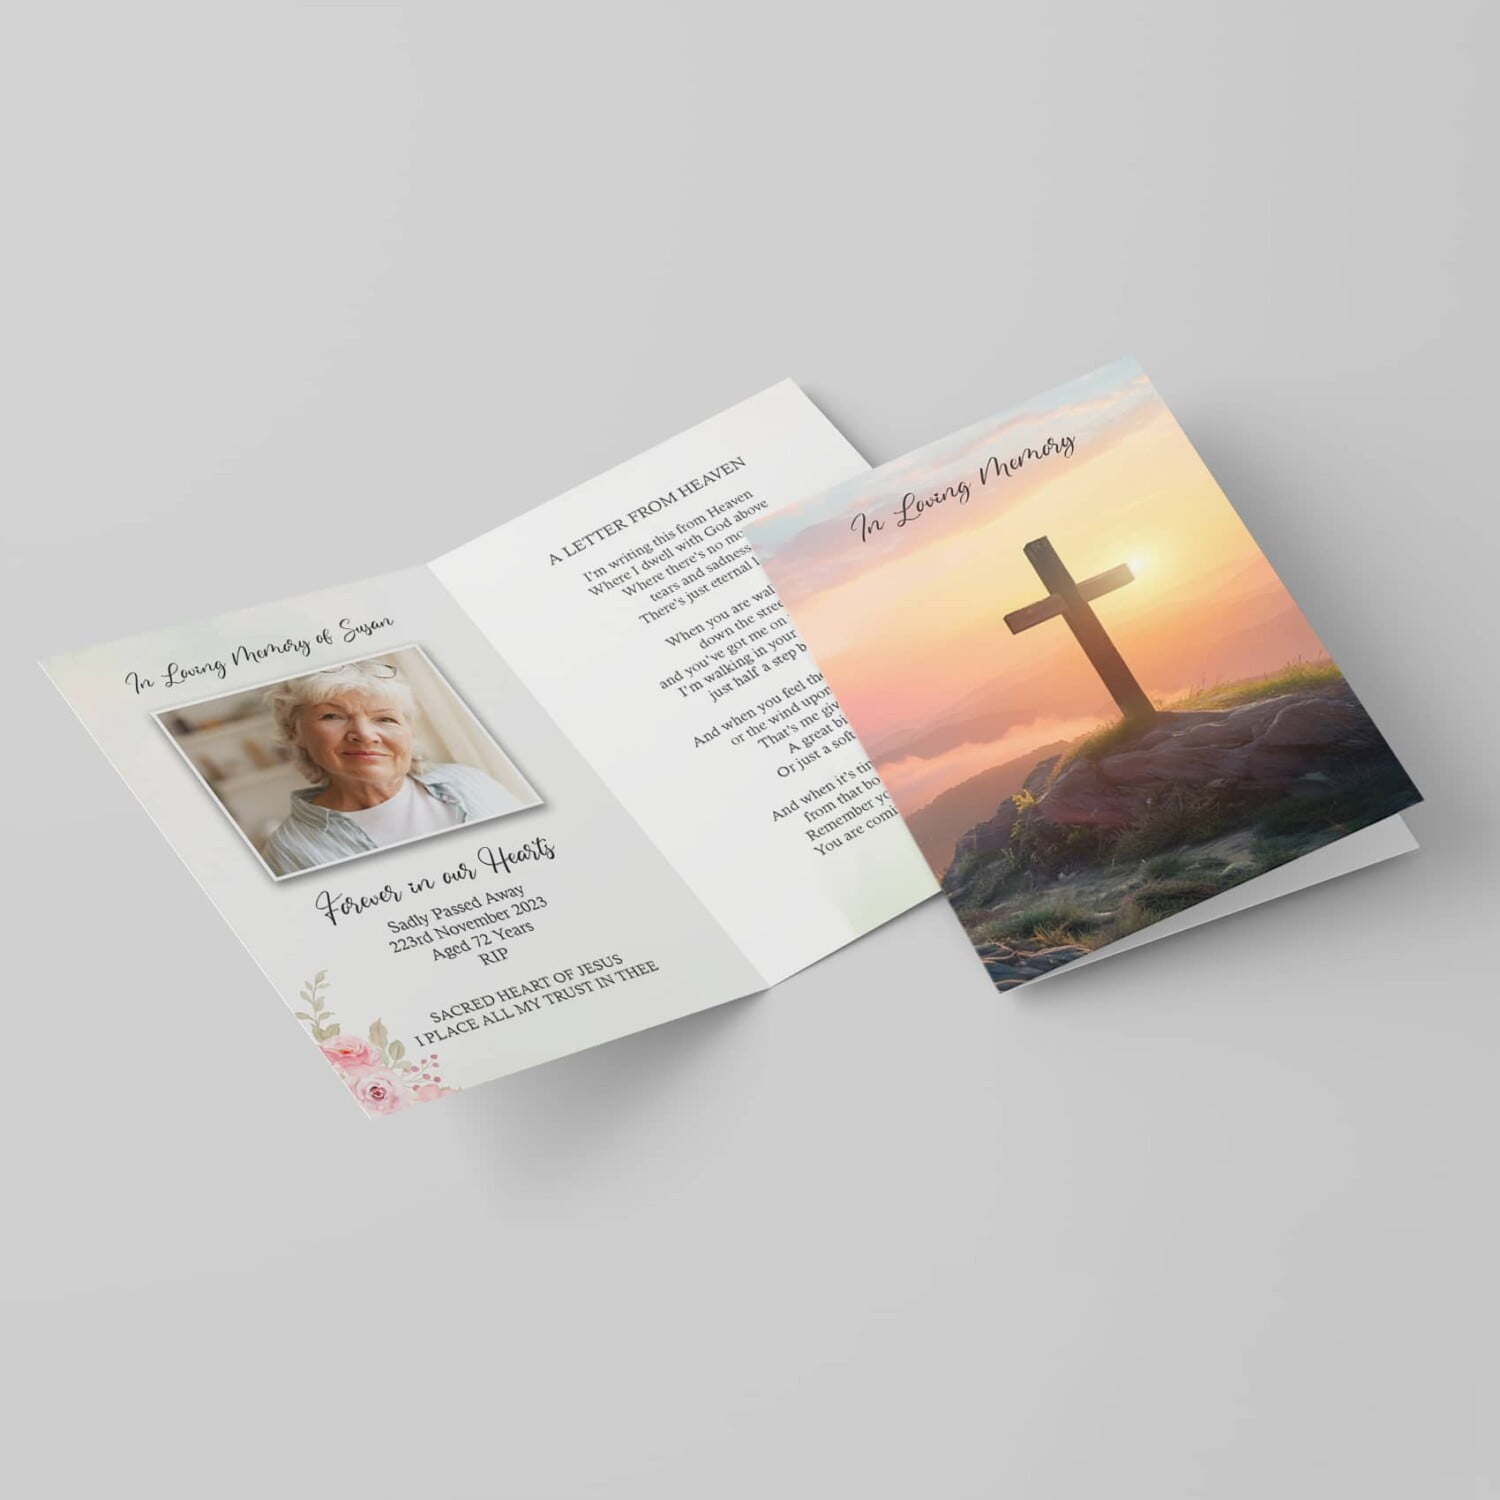 Holy Cross Memorial Card printed by Design Gaff in County Monaghan, Ireland